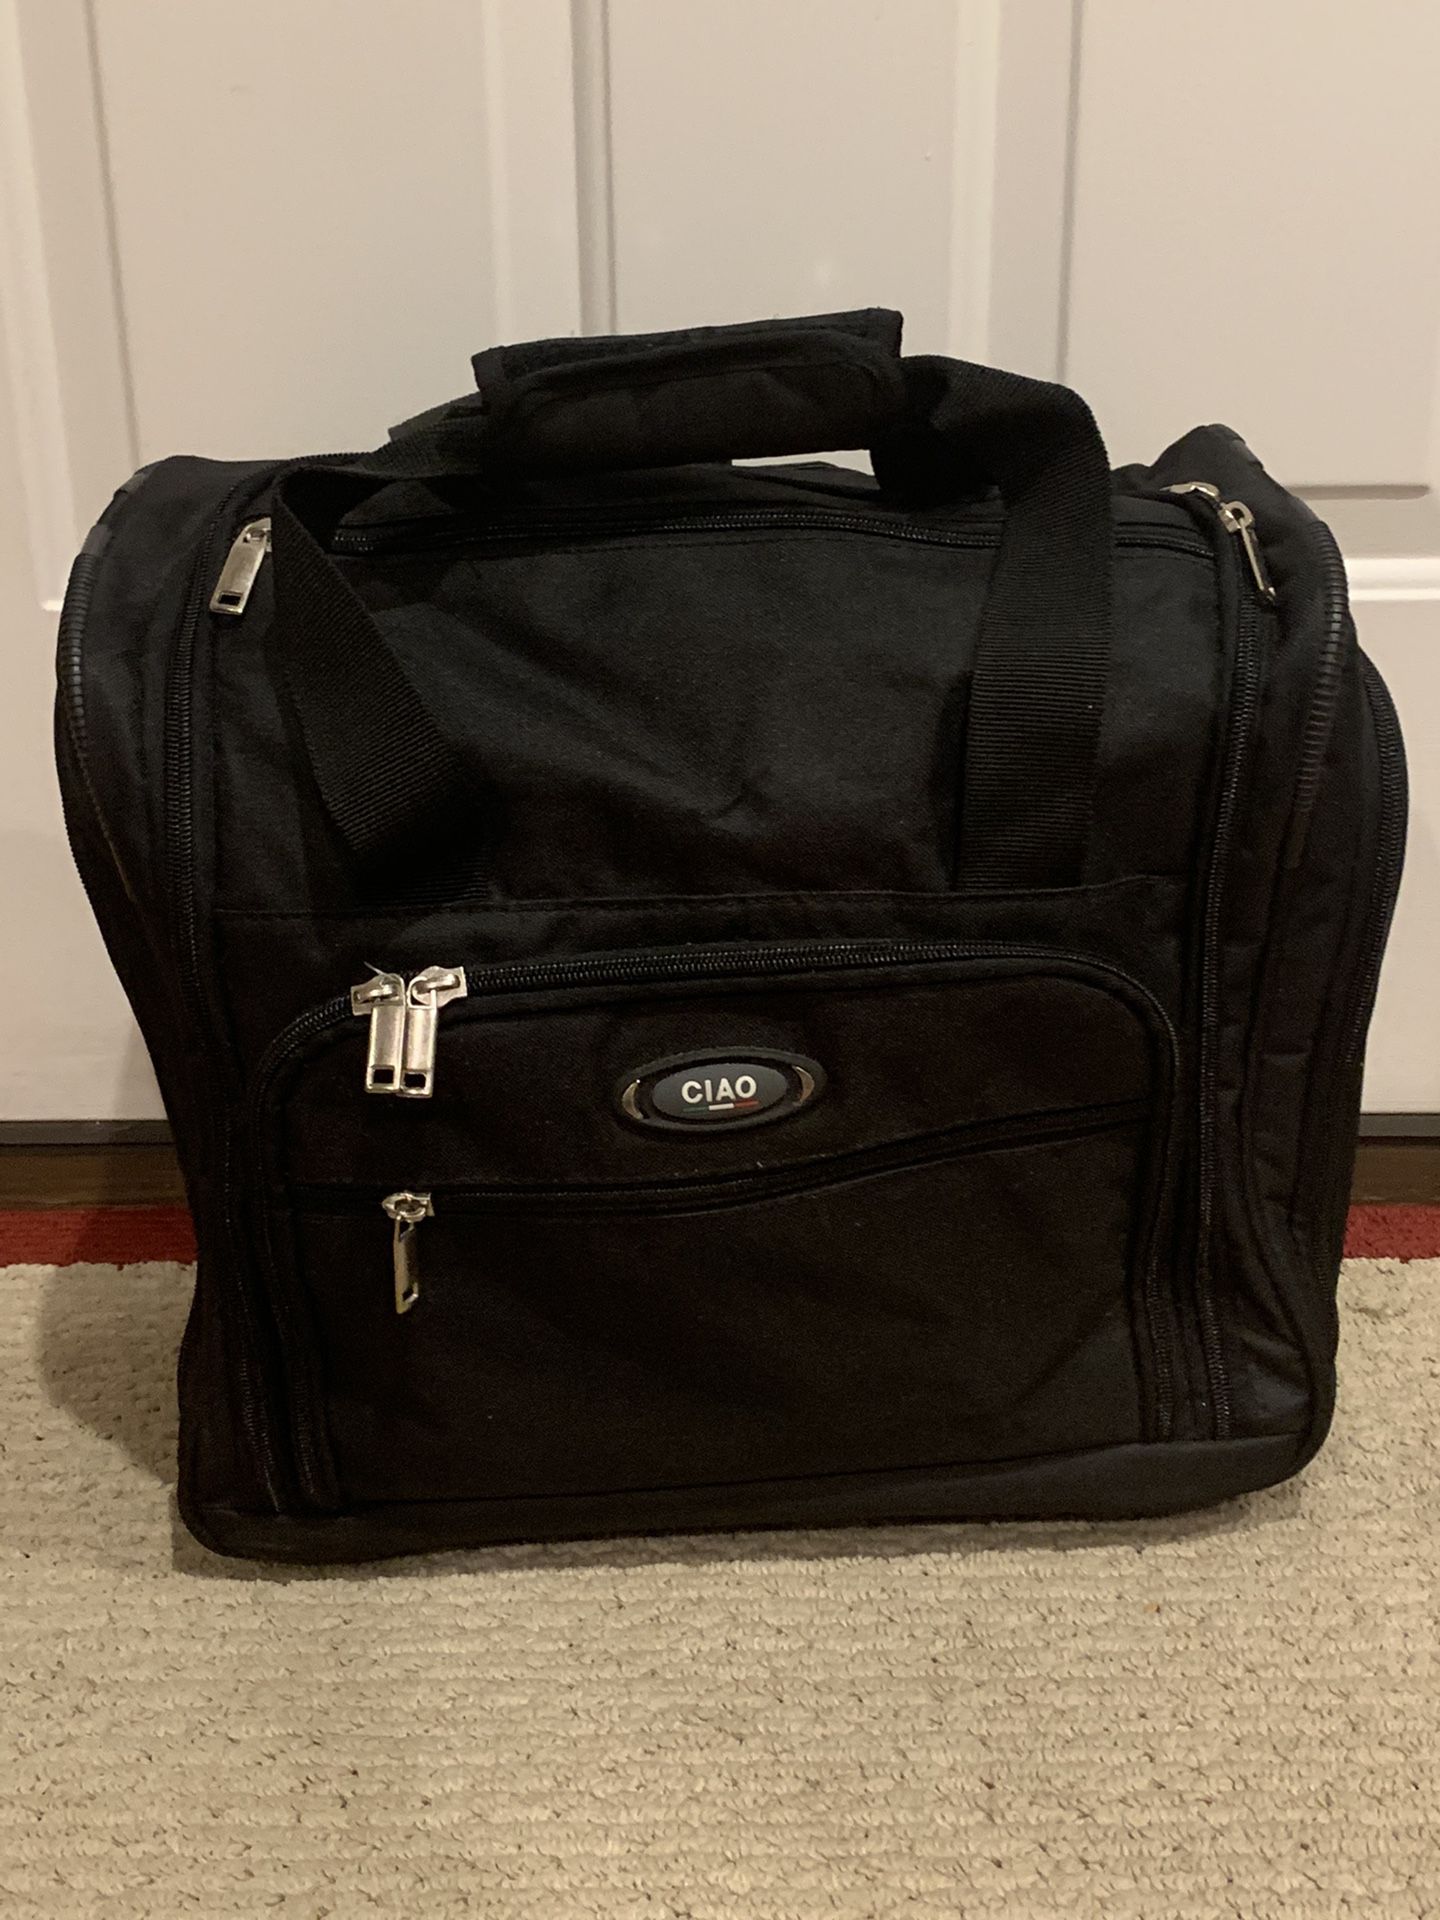 Carry-On/Rolling Suitcase for Sale